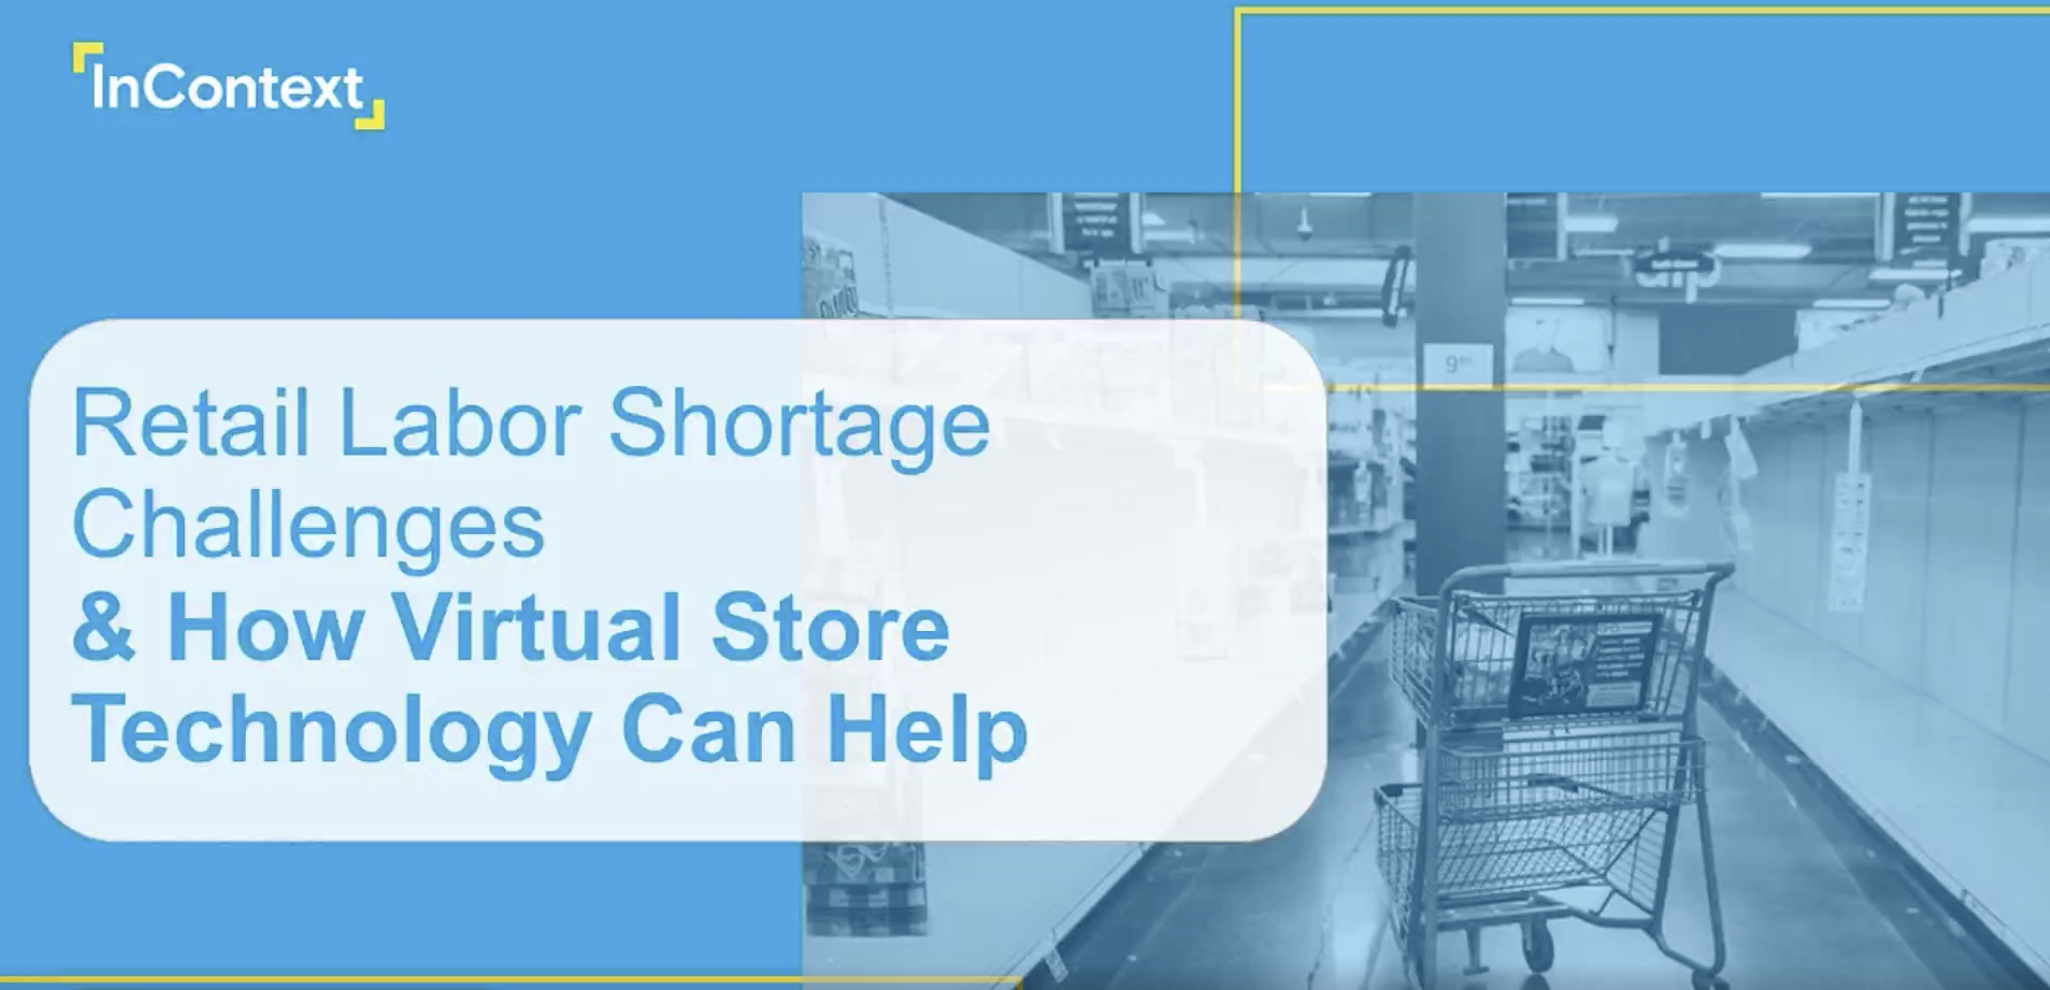 Retail Labor Shortage Challenges & How Virtual Store Technology Can Help